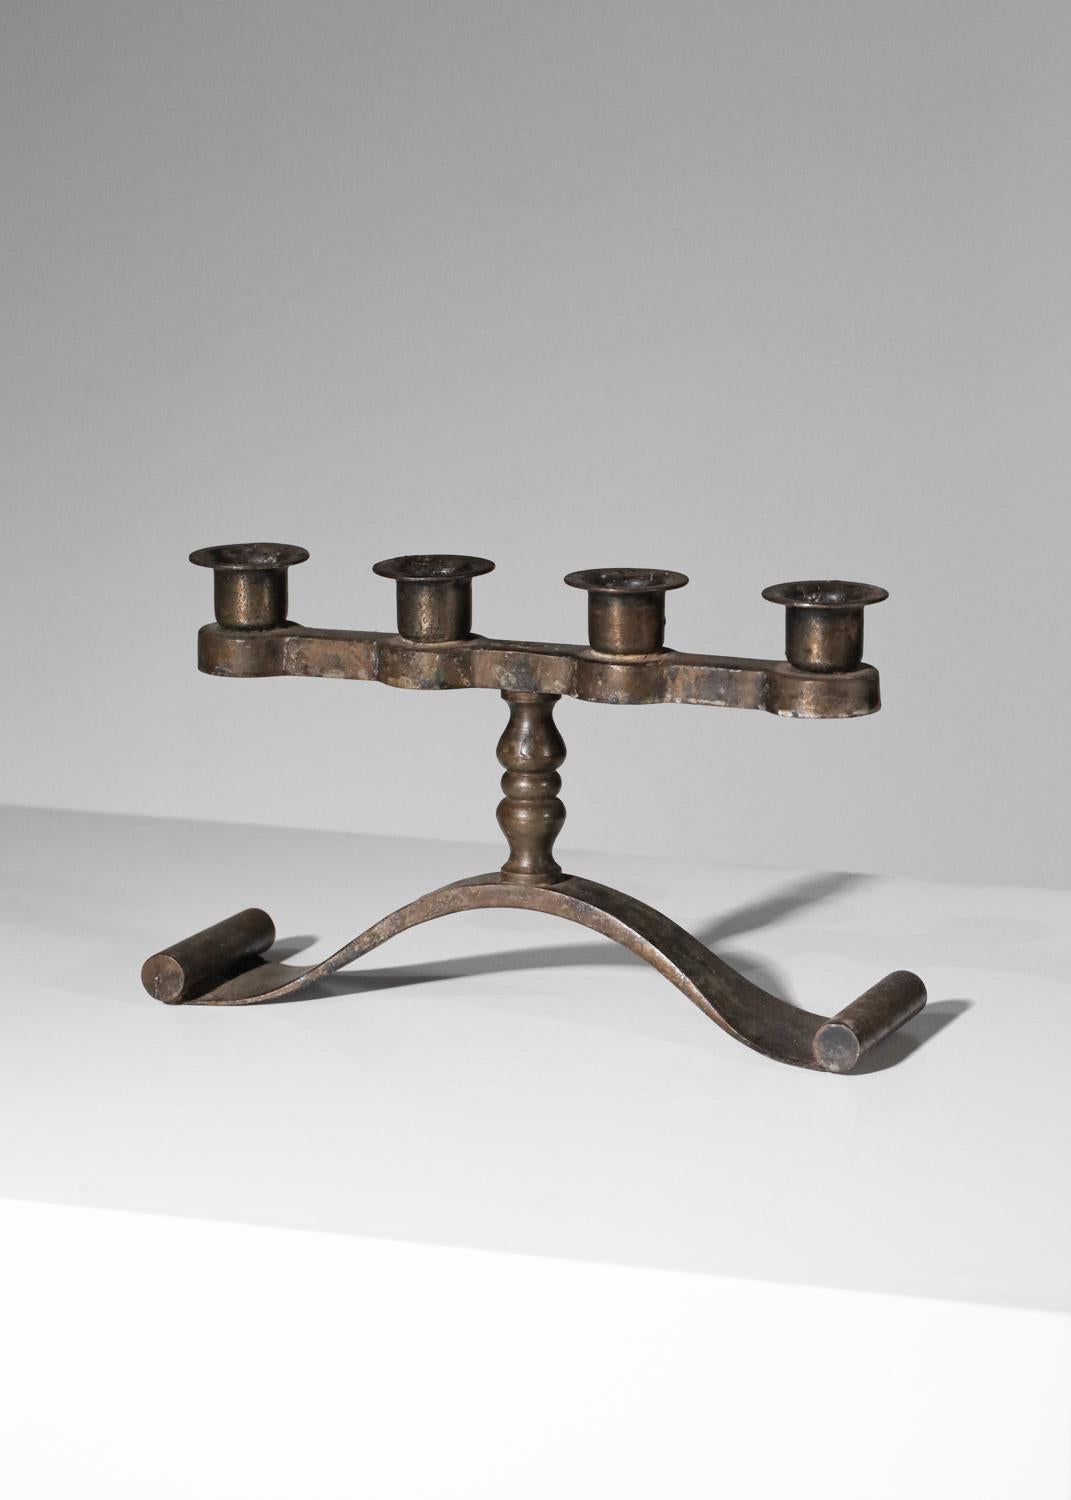 Charles Piguet wrought iron candlestick 30s 40s For Sale 2